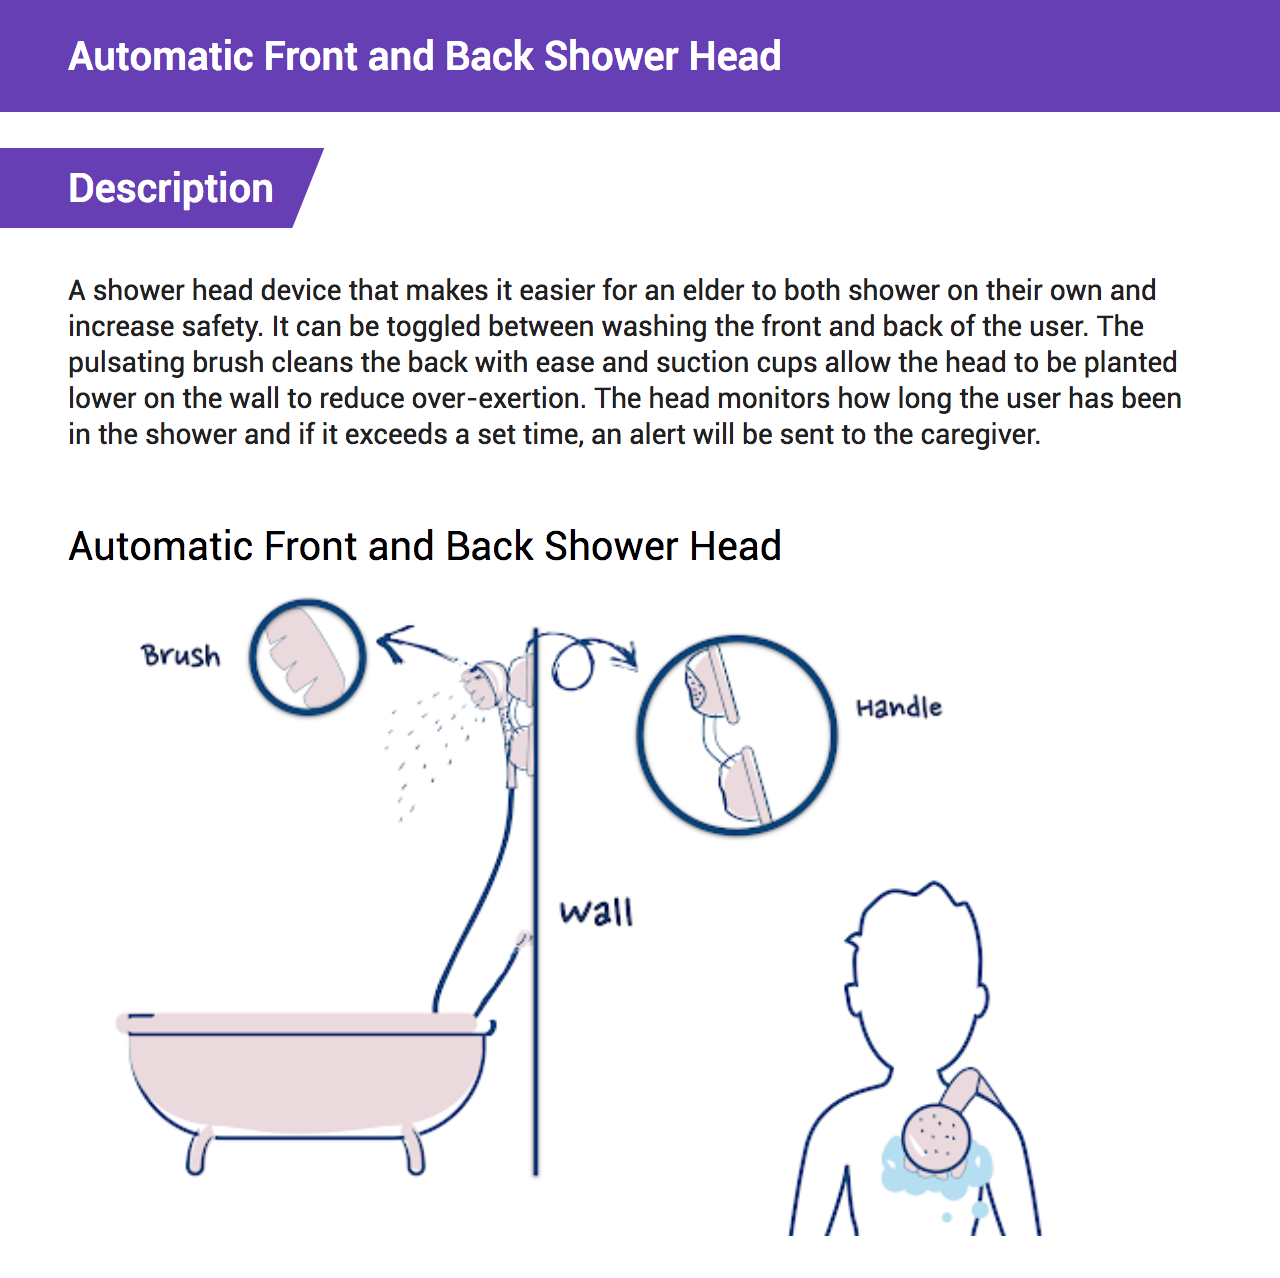 Automatic Front and Back Shower Head